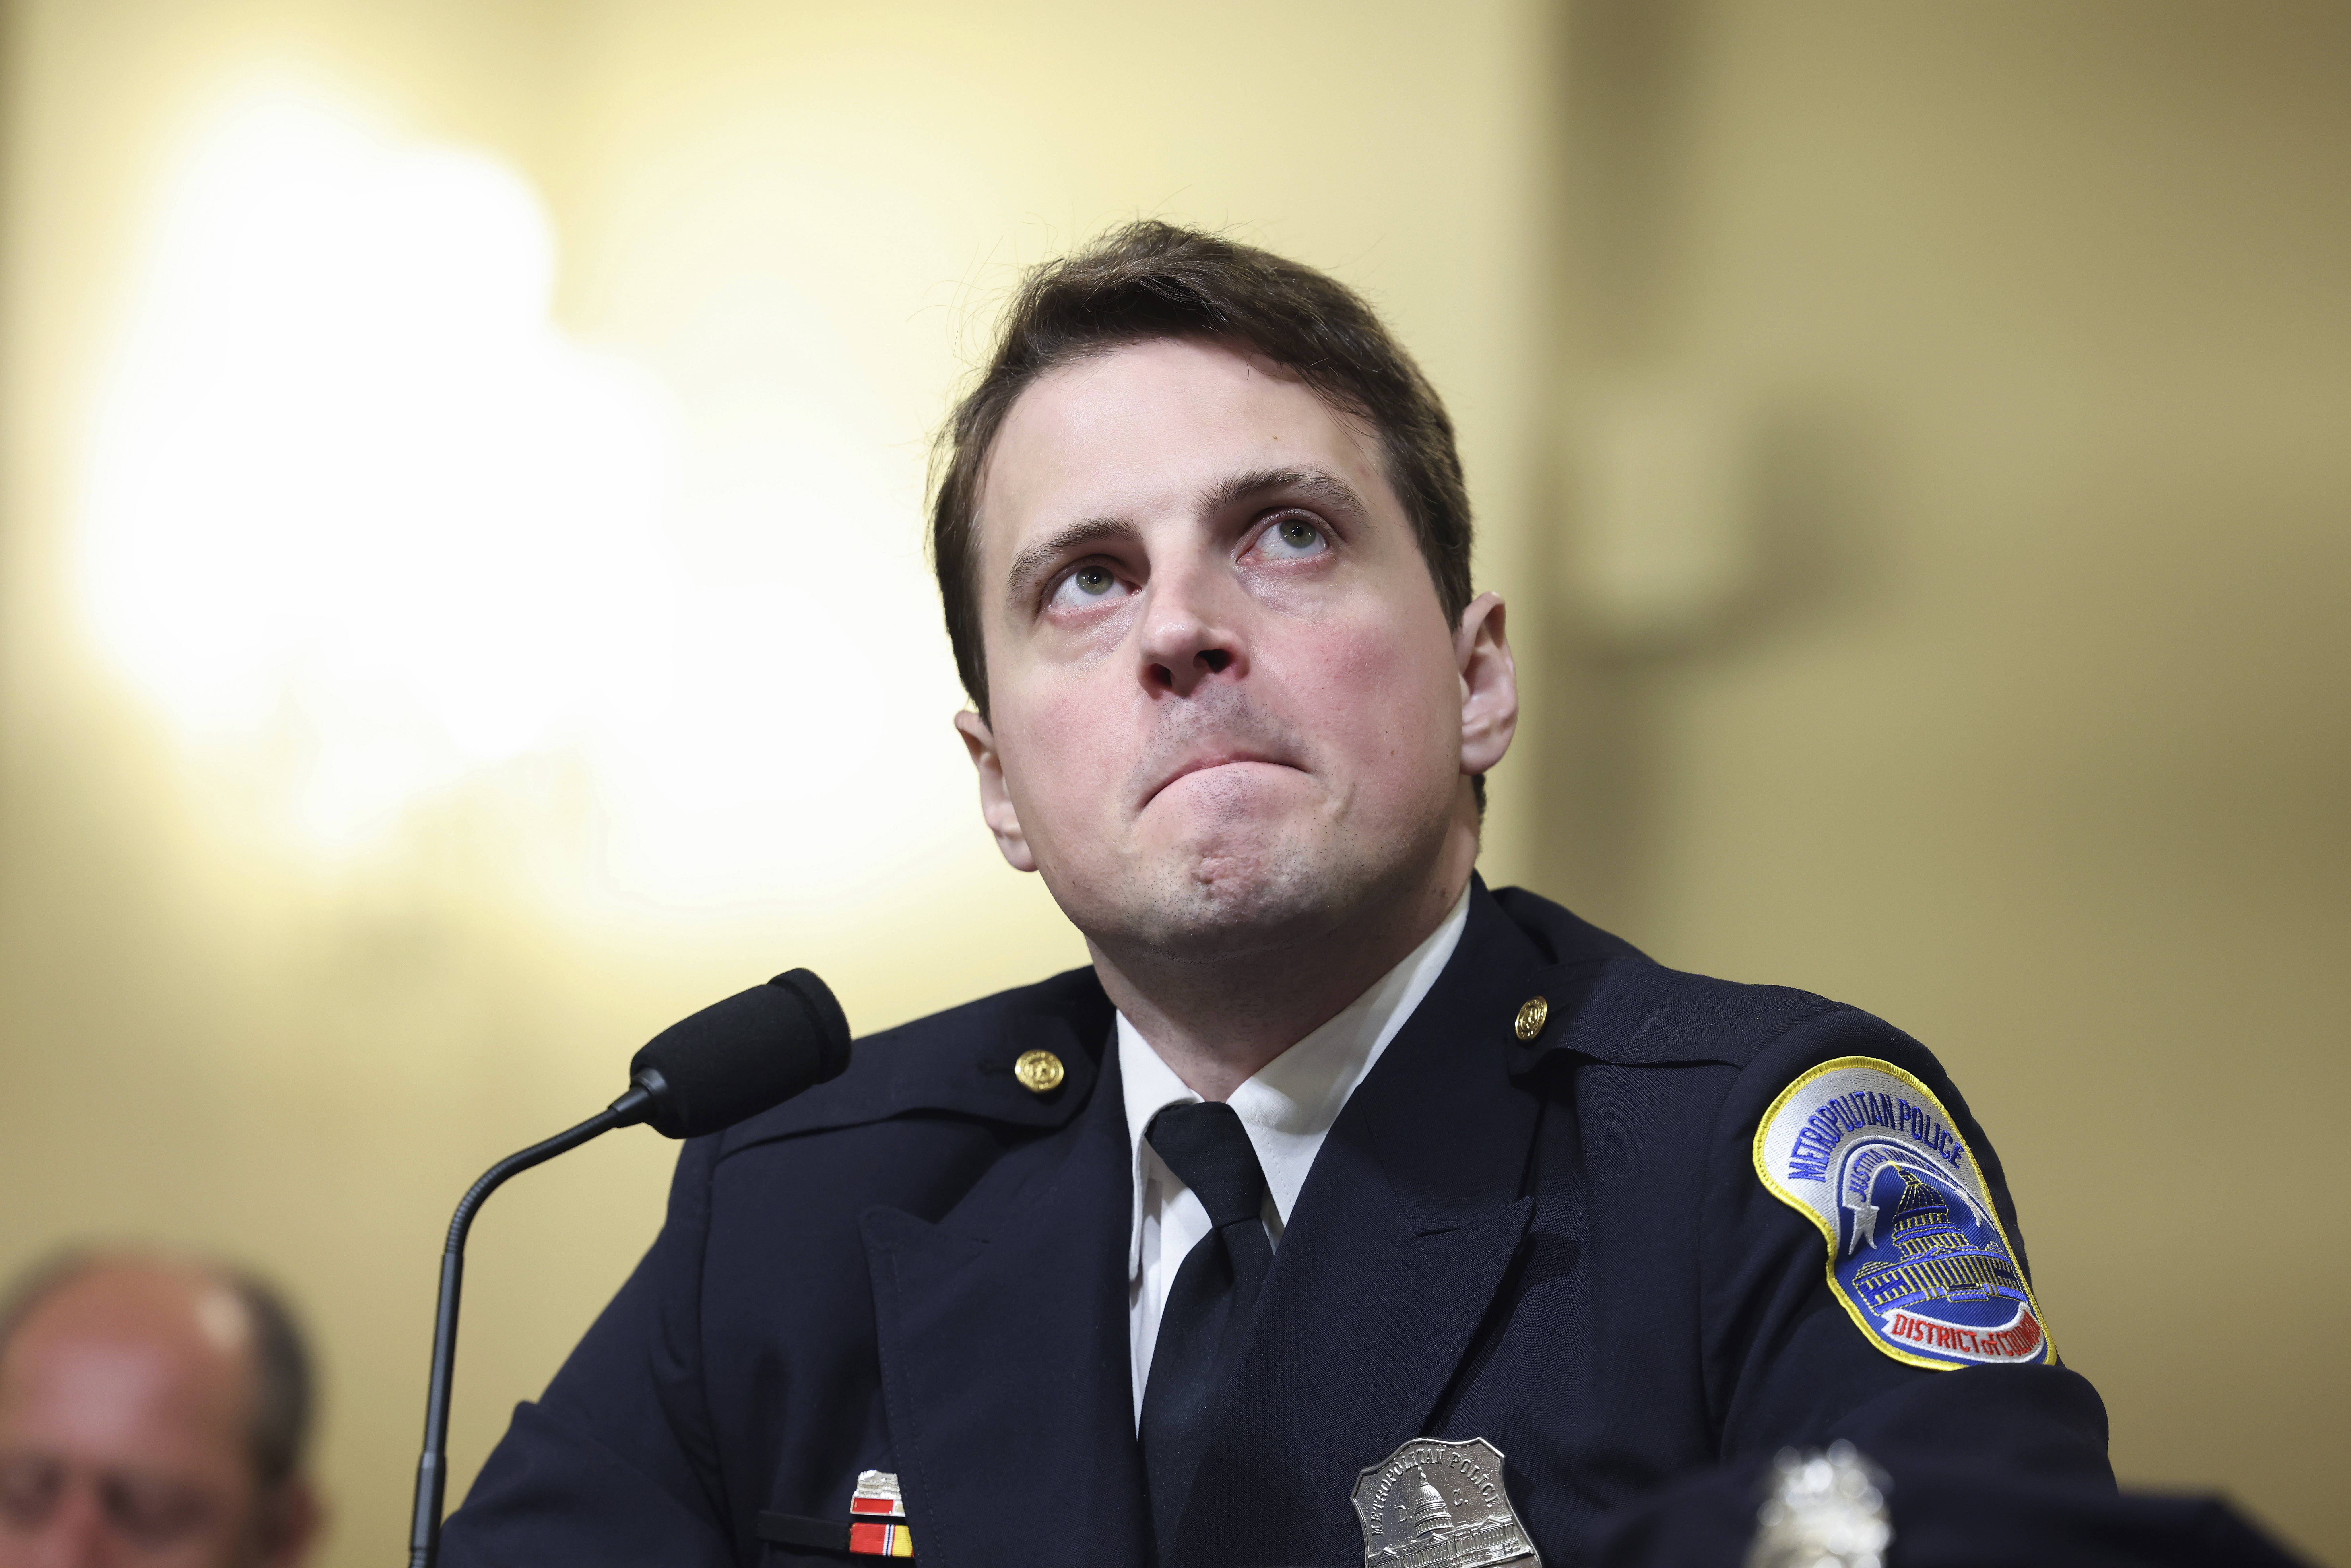 Washington Metropolitan Police Department Officer Daniel Hodges watches footage from his body camera during the House select committee hearing on Tuesday, July 27.